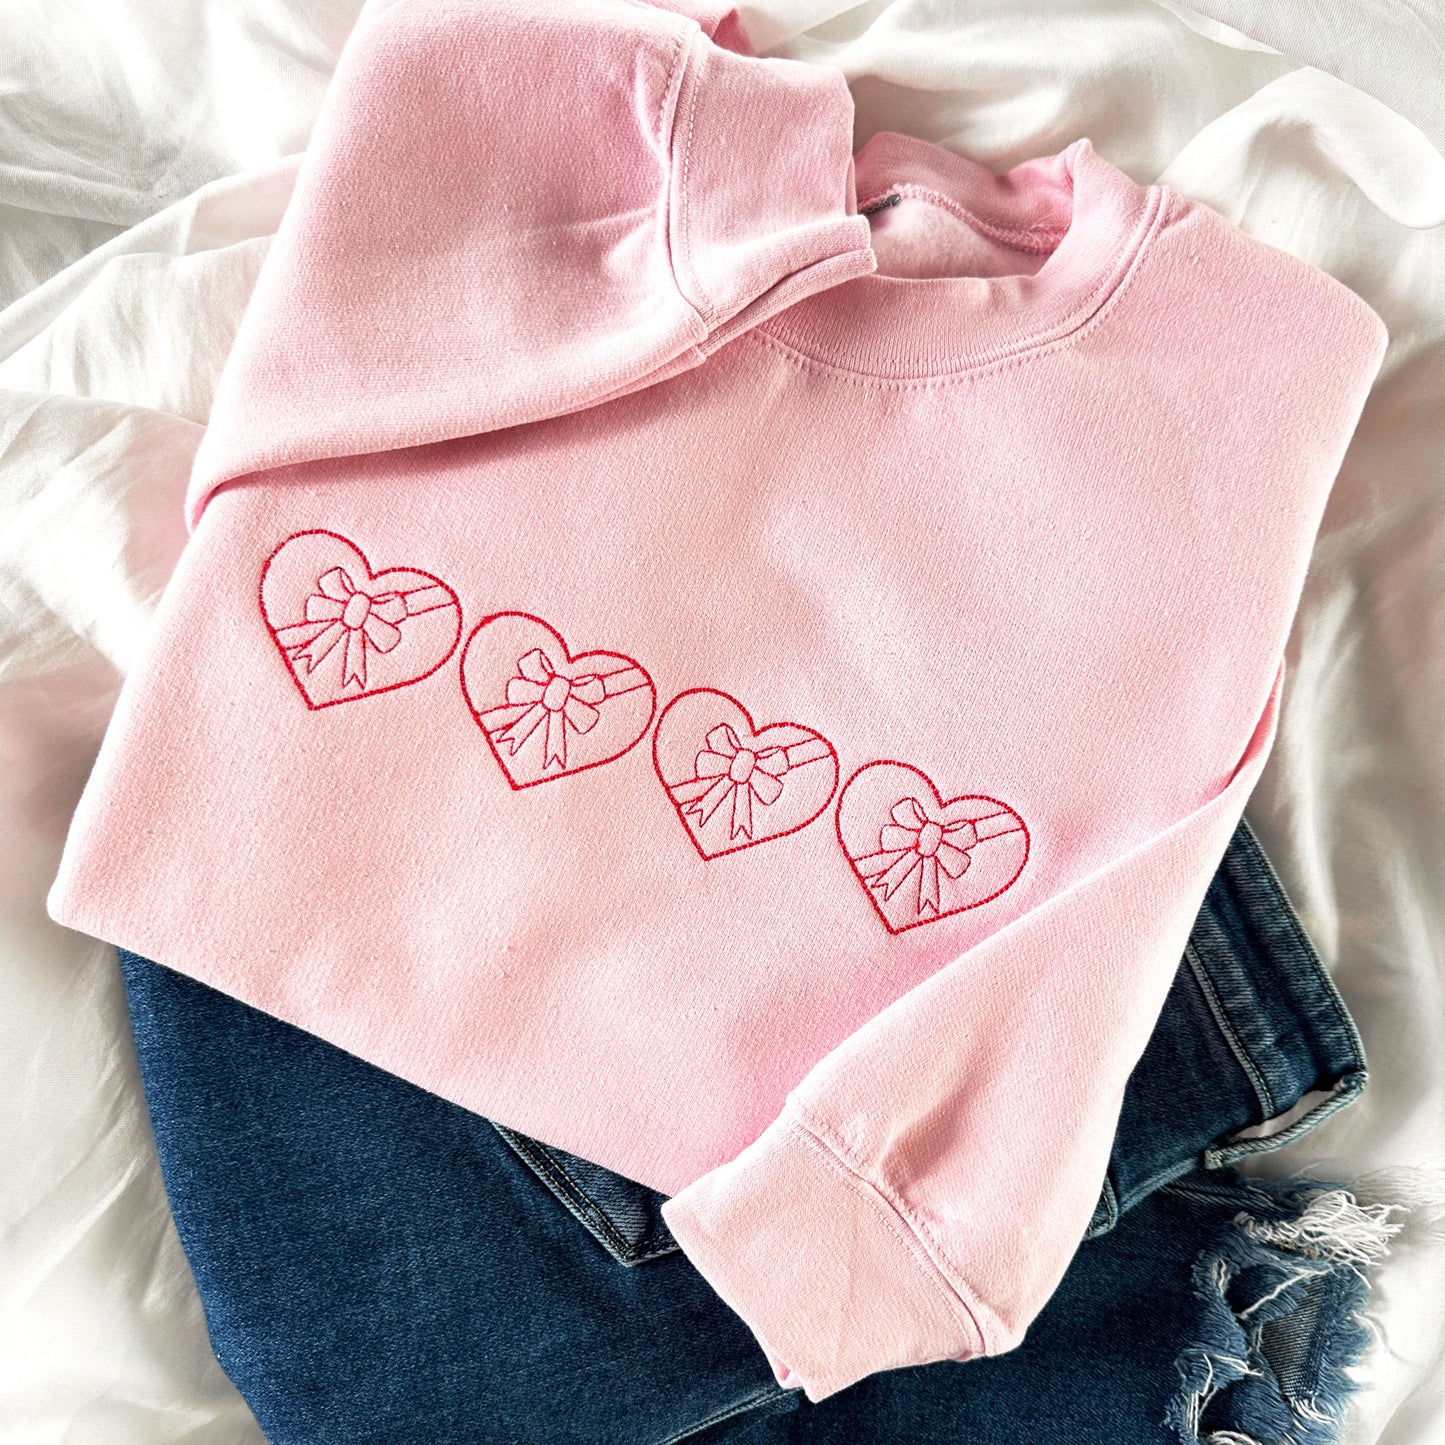 flay lay of a light pink crewneck sweatshirt and jeans. on the sweatshirt if 4 stitched valentines hearts with bows embroidered across the chest in raspberry thread